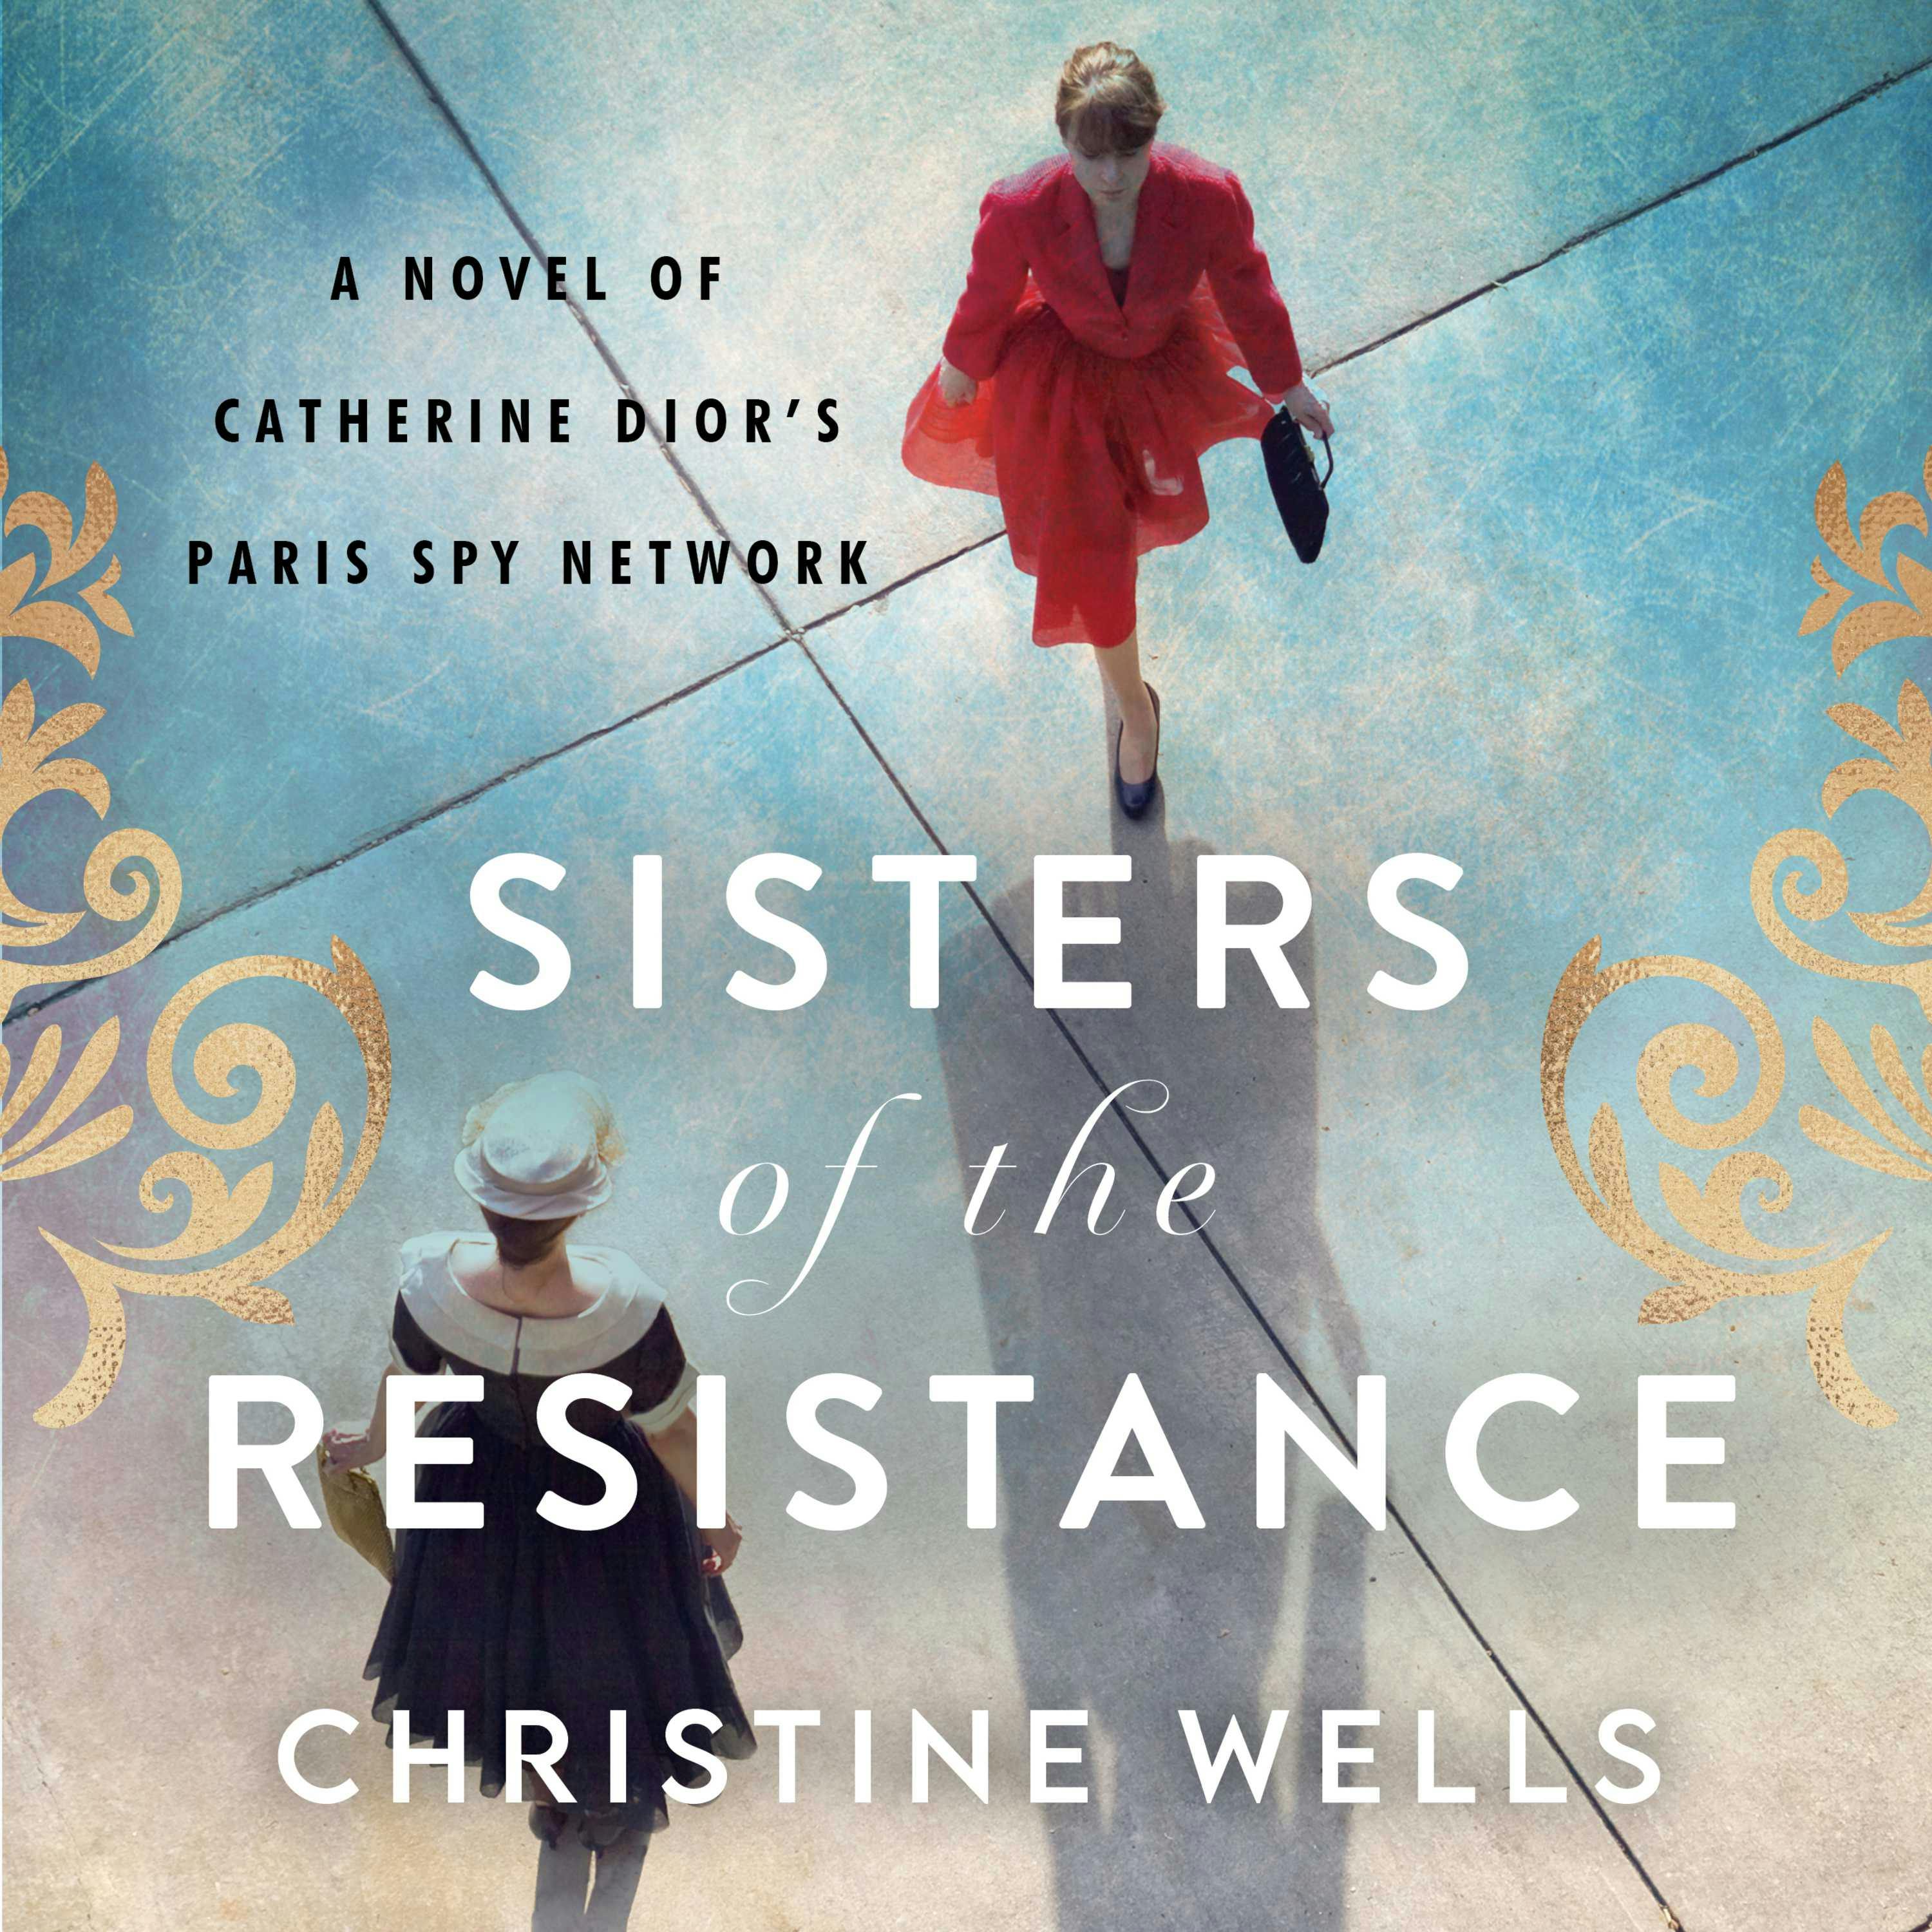 Sisters of the Resistance: A Novel of Catherine Dior's Paris Spy Network - Christine Wells